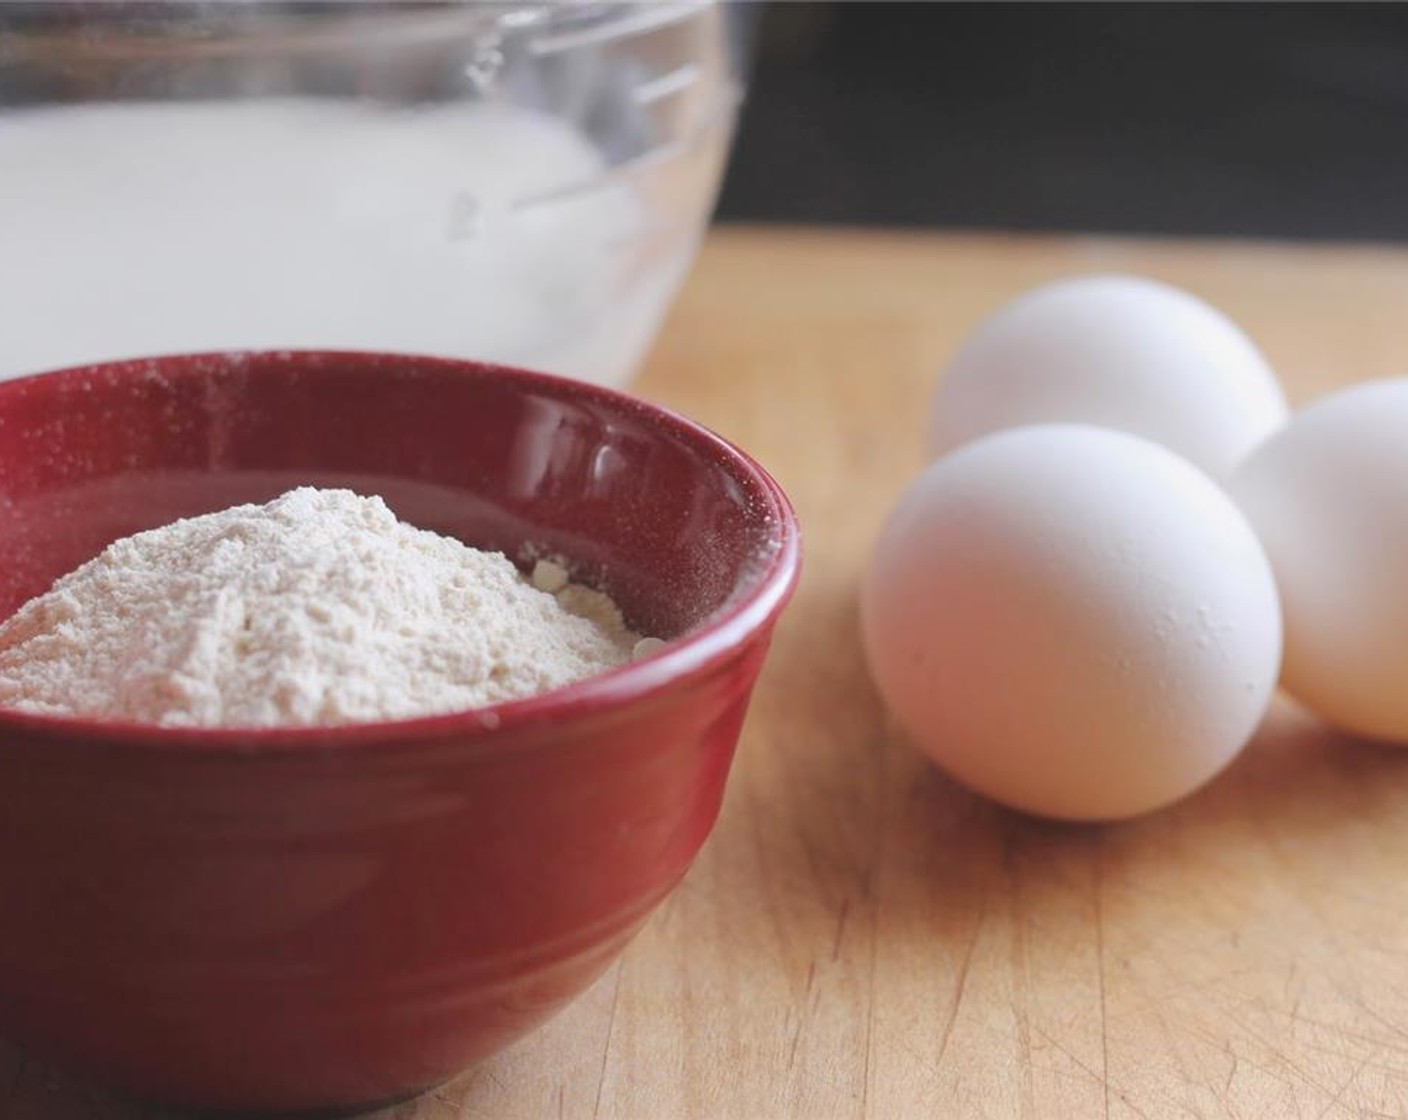 step 1 Put the Milk (1 cup), Eggs (3) and All-Purpose Flour (2/3 cup) into a blender. Blend the ingredients until thoroughly mixed together.